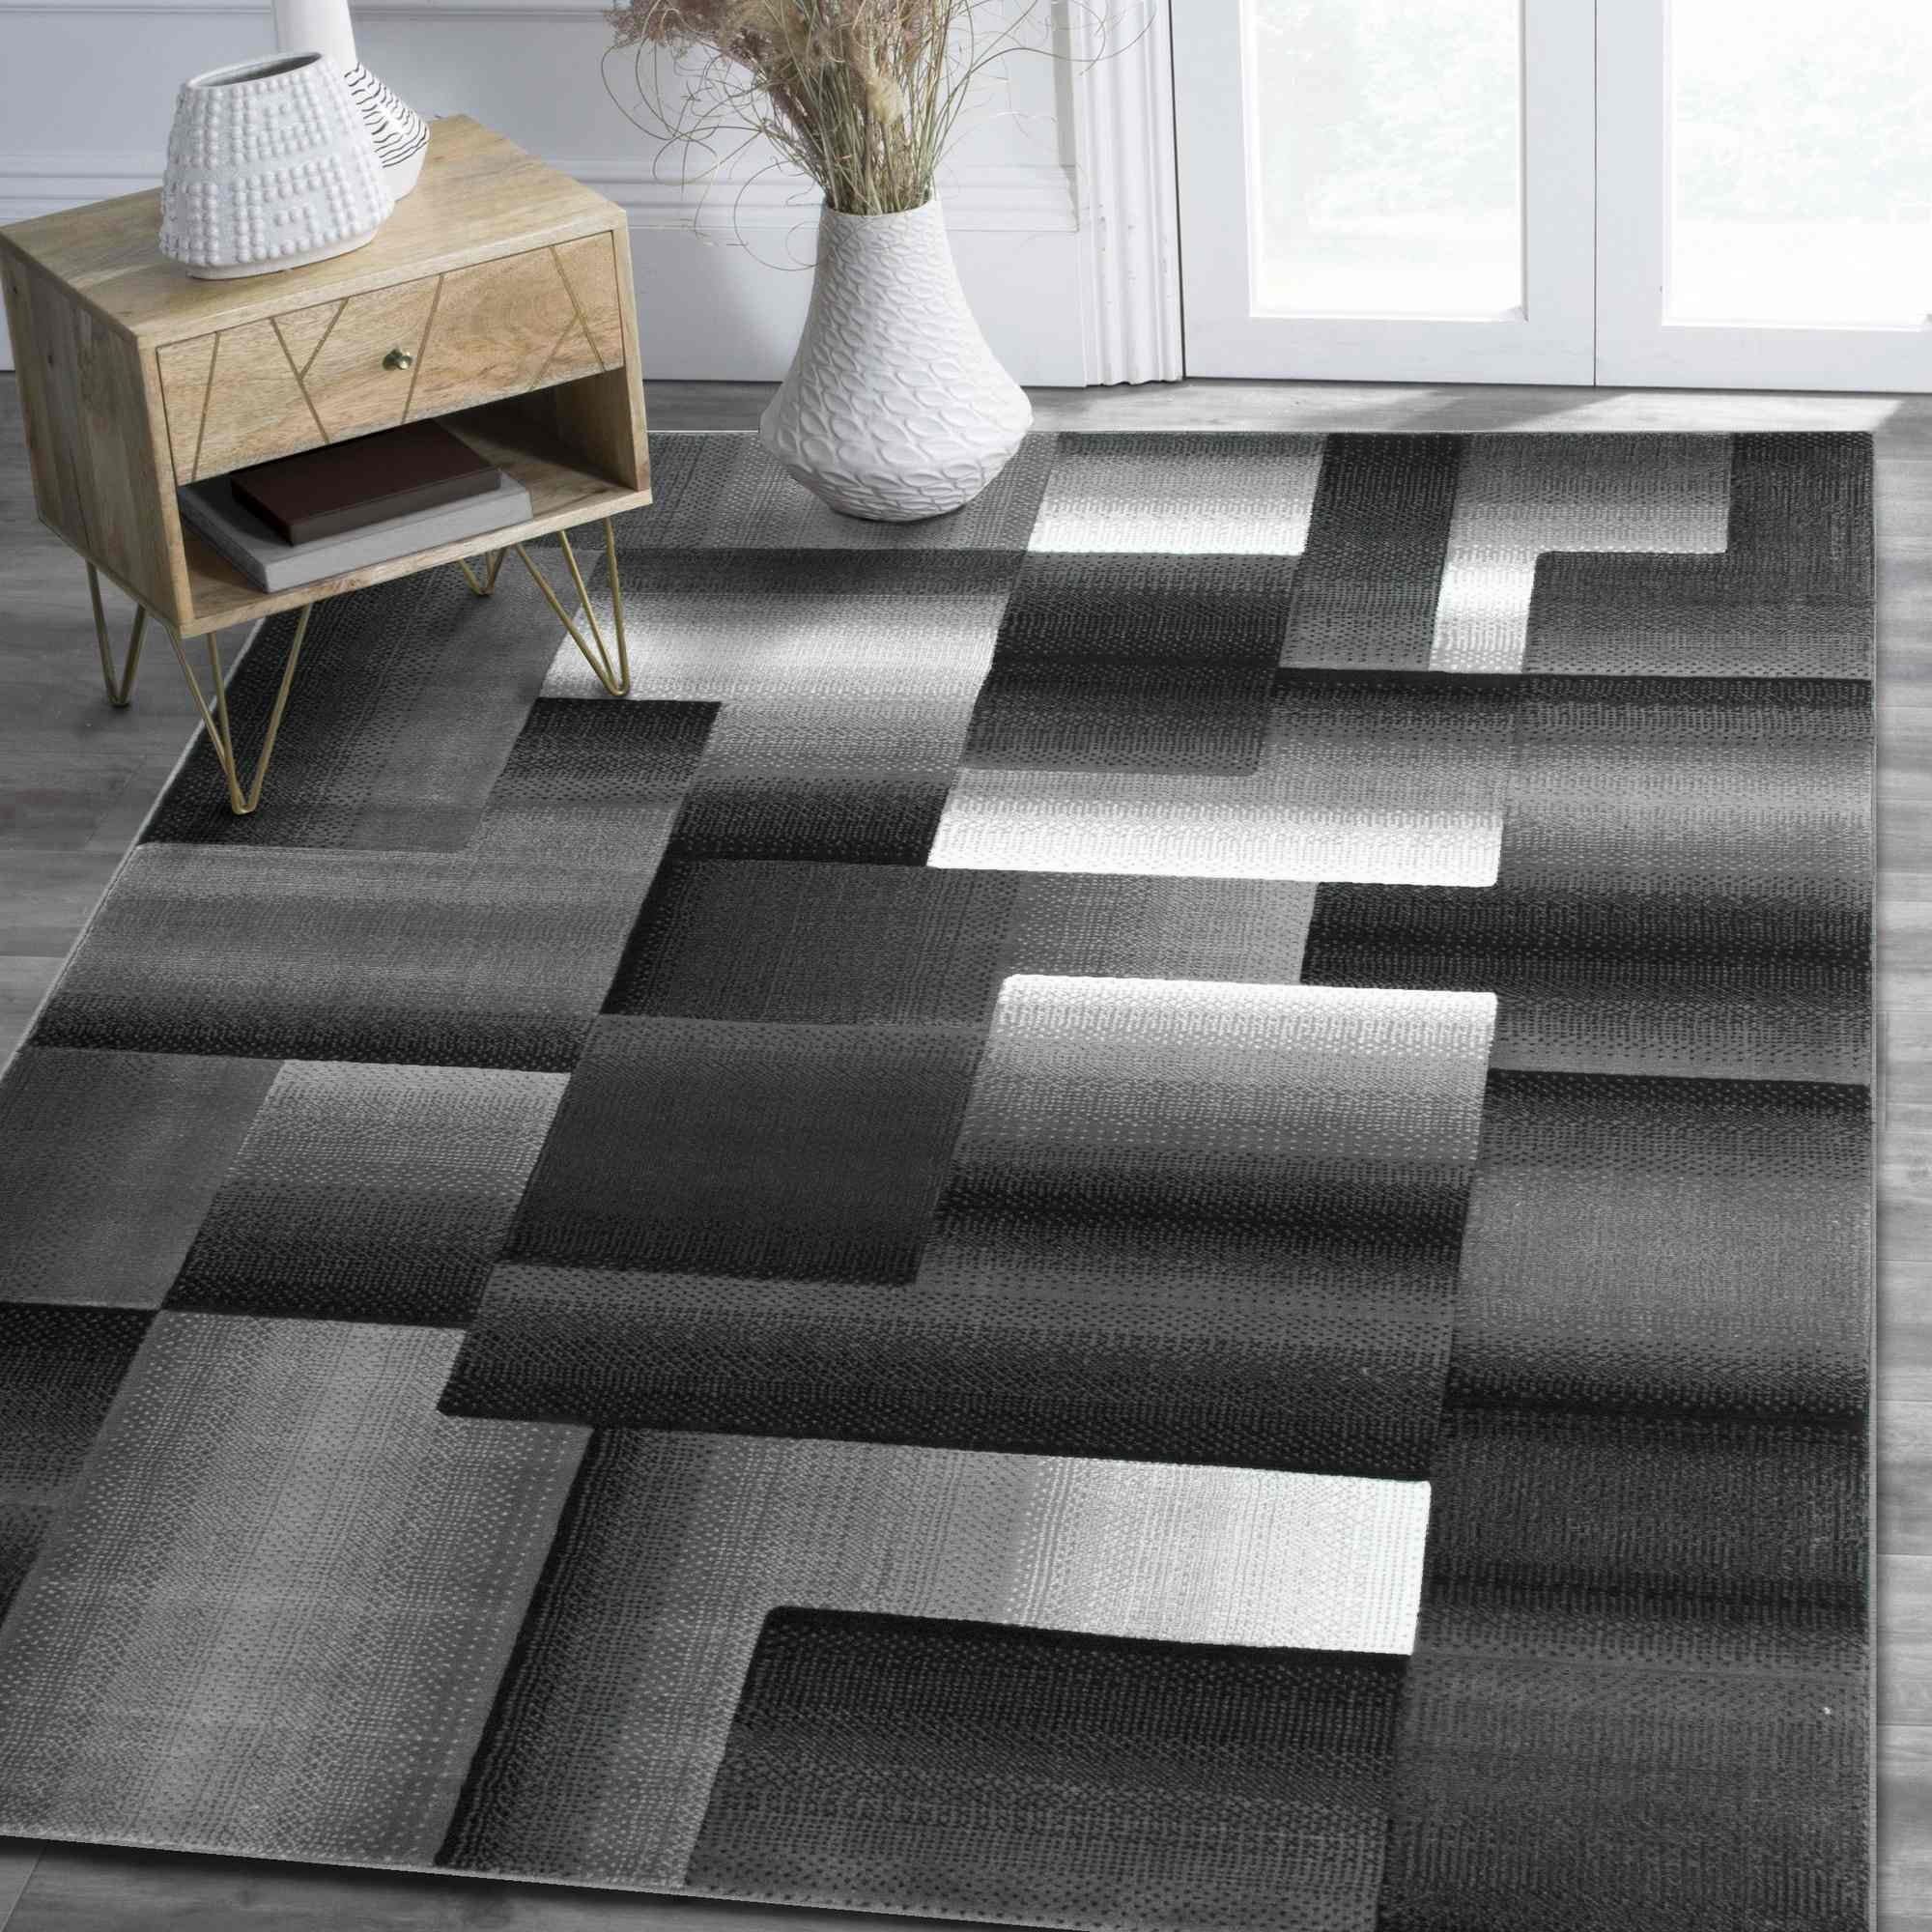 Thomasville Timeless Classic Rug Collection, Alden | Costco